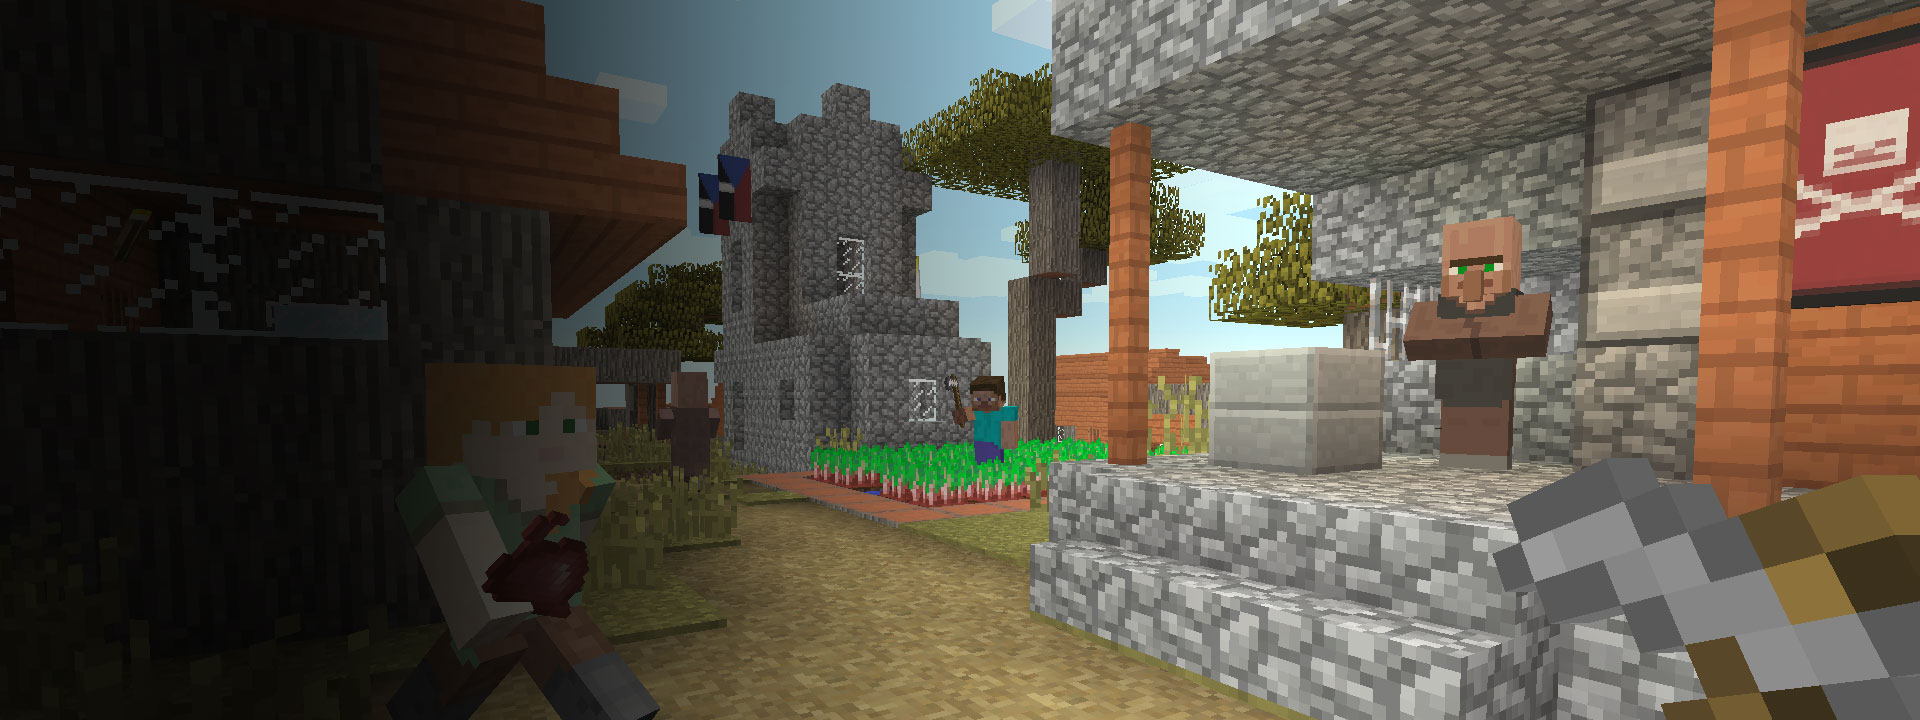 Multiple houses and Minecraft characters walking in the foreground.